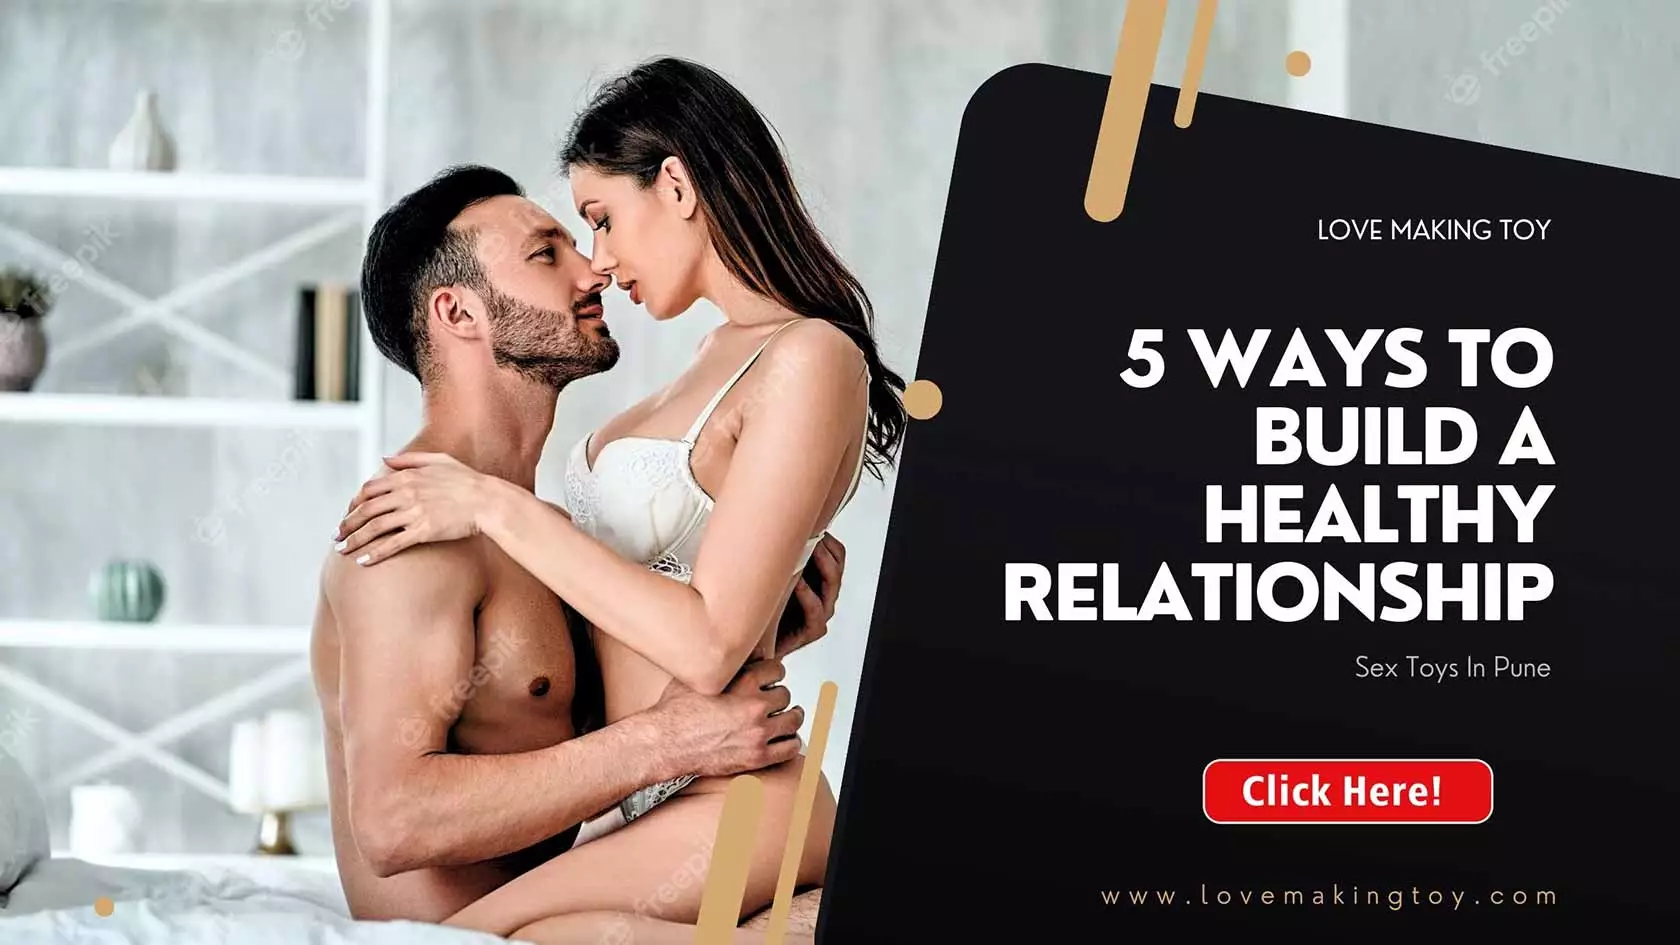 Sex Toys In Pune-5 Ways to build a healthy relationship-lovemakingtoy.com